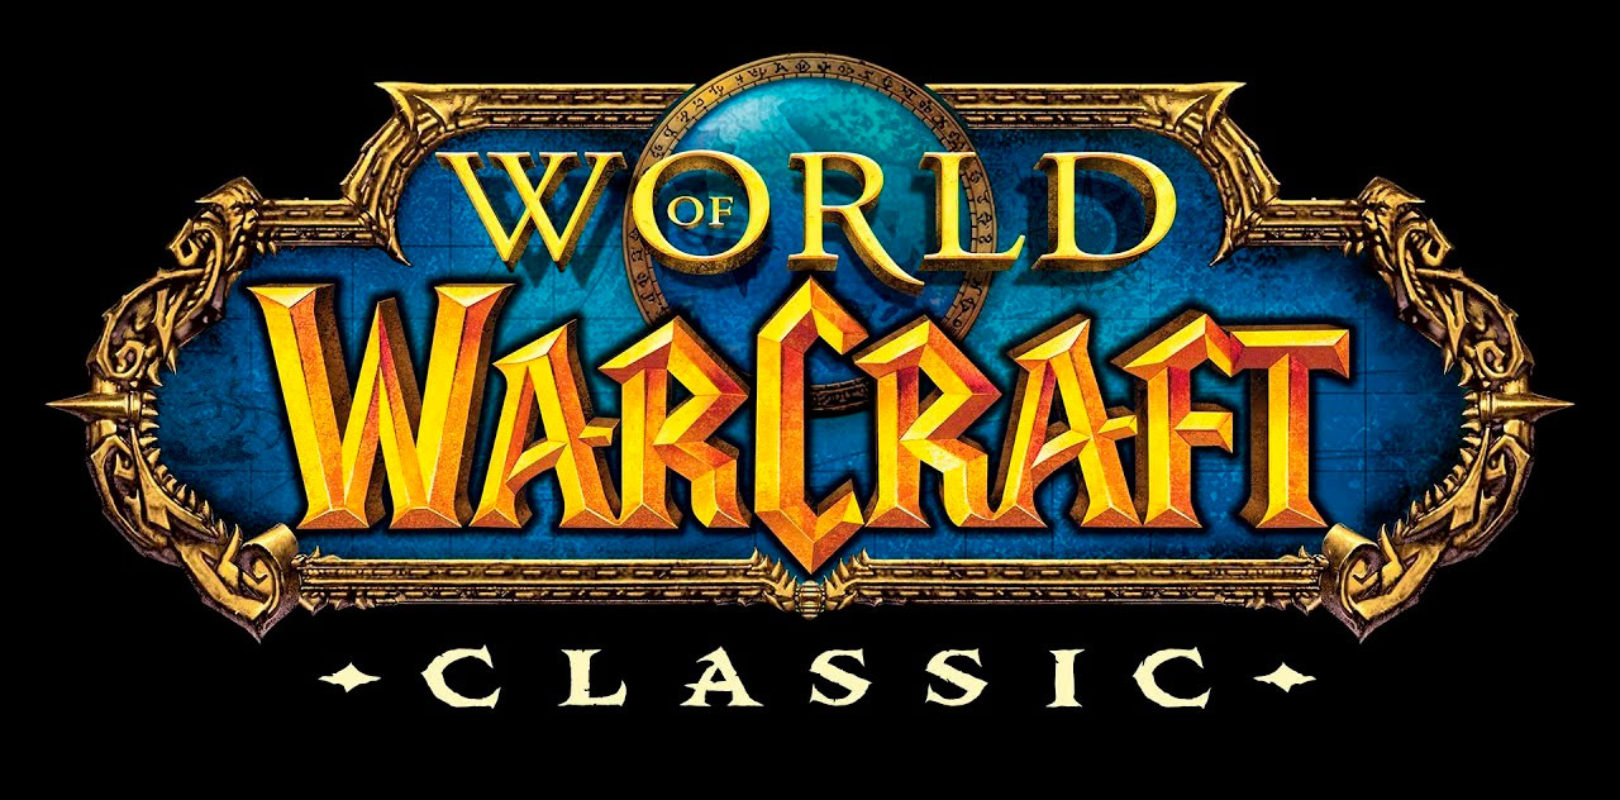 dan freire recommends world of warcraft rp pic